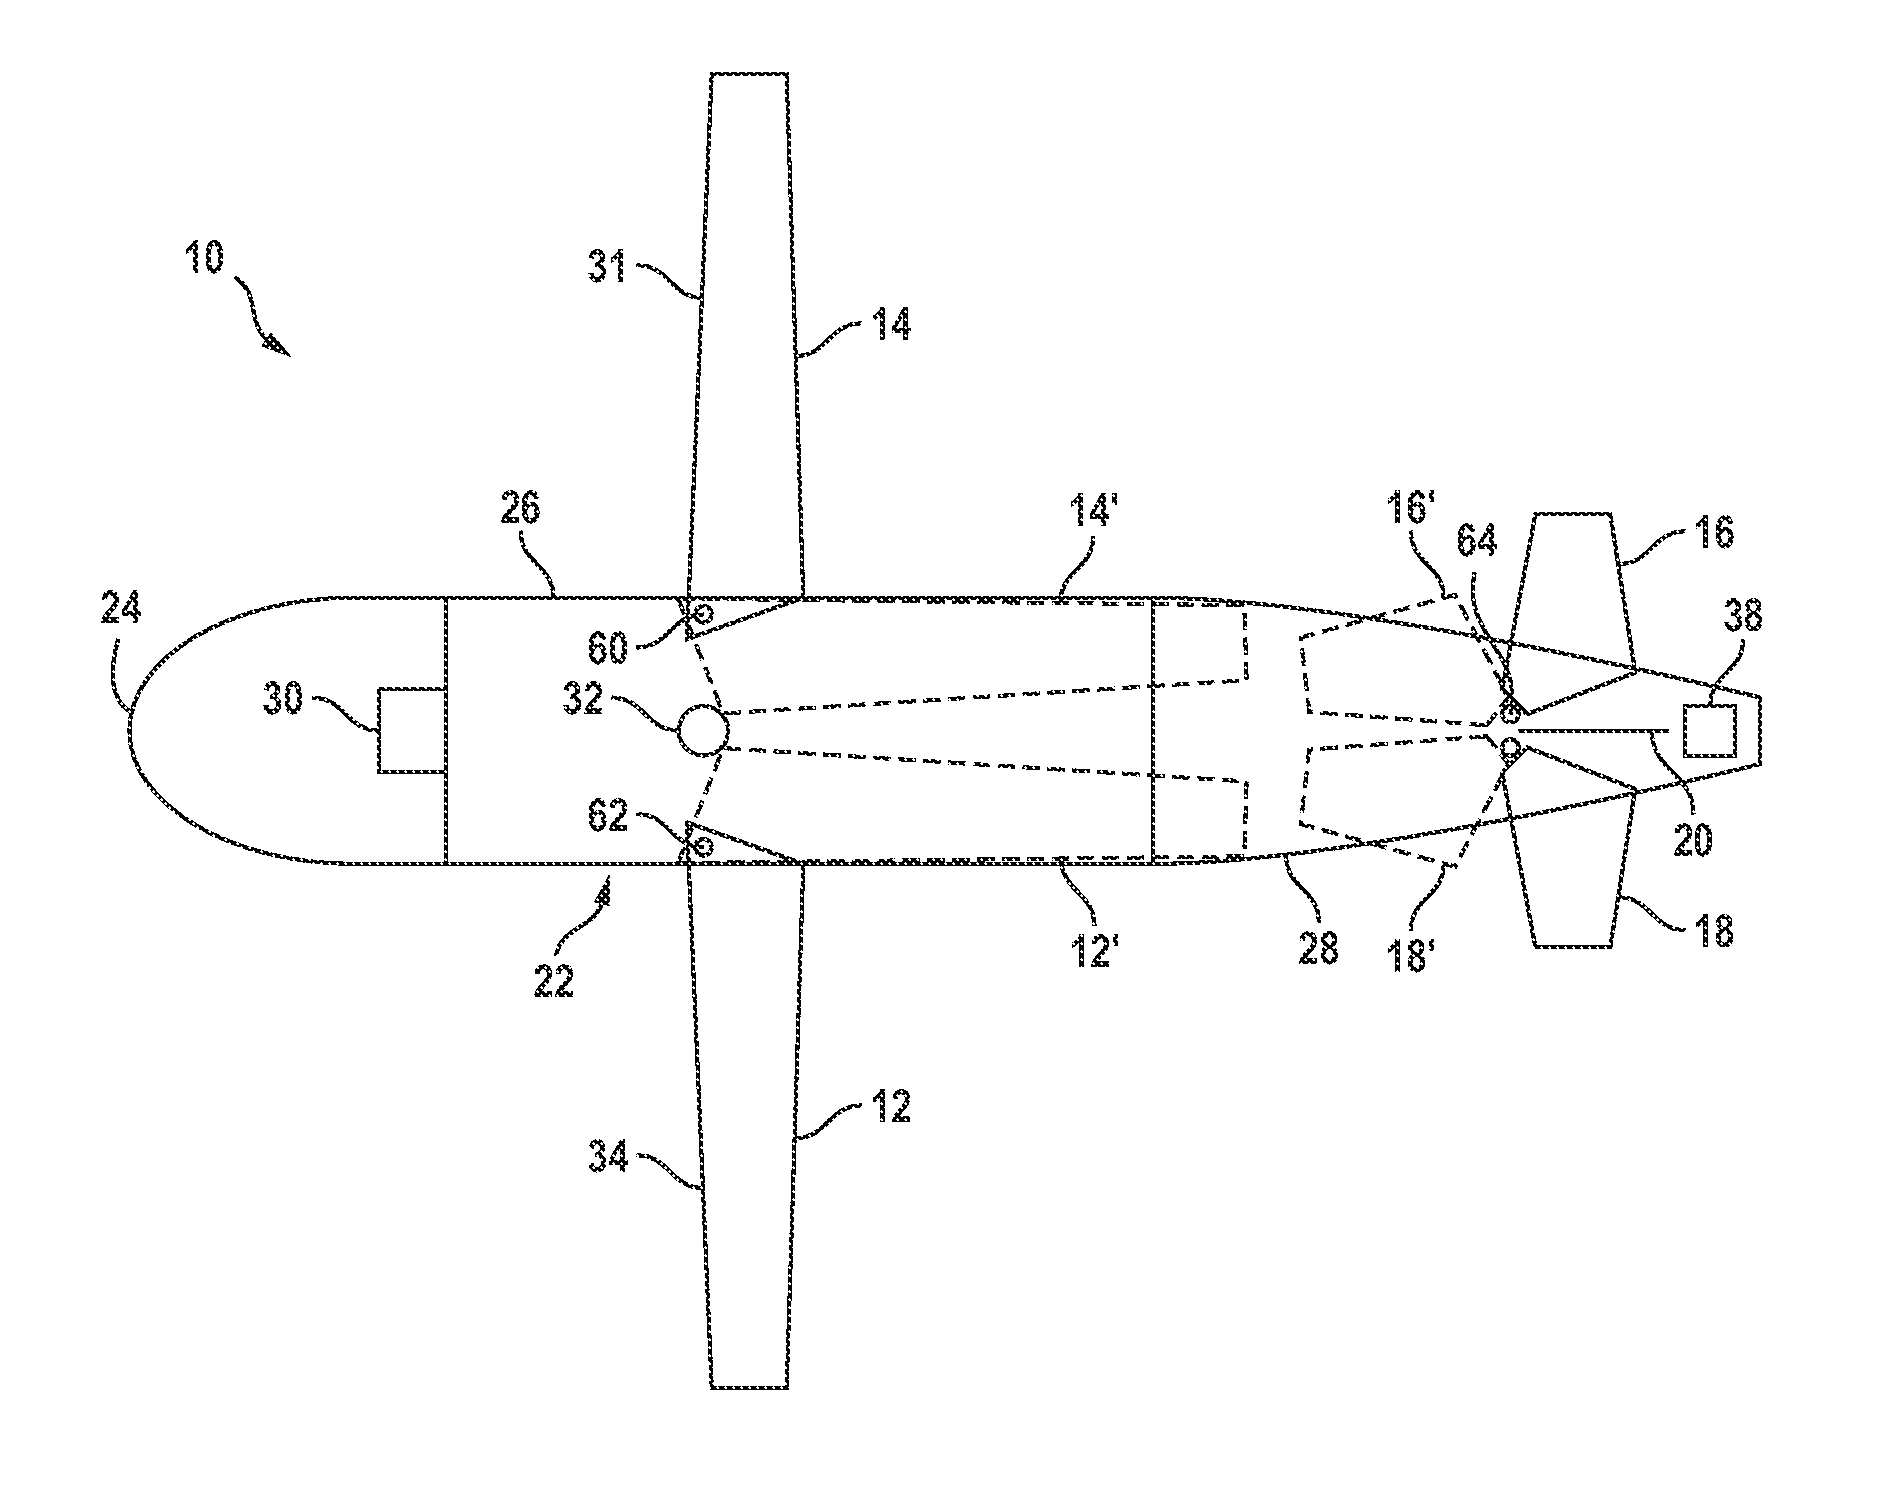 Vehicle for aerial delivery of fire retardant